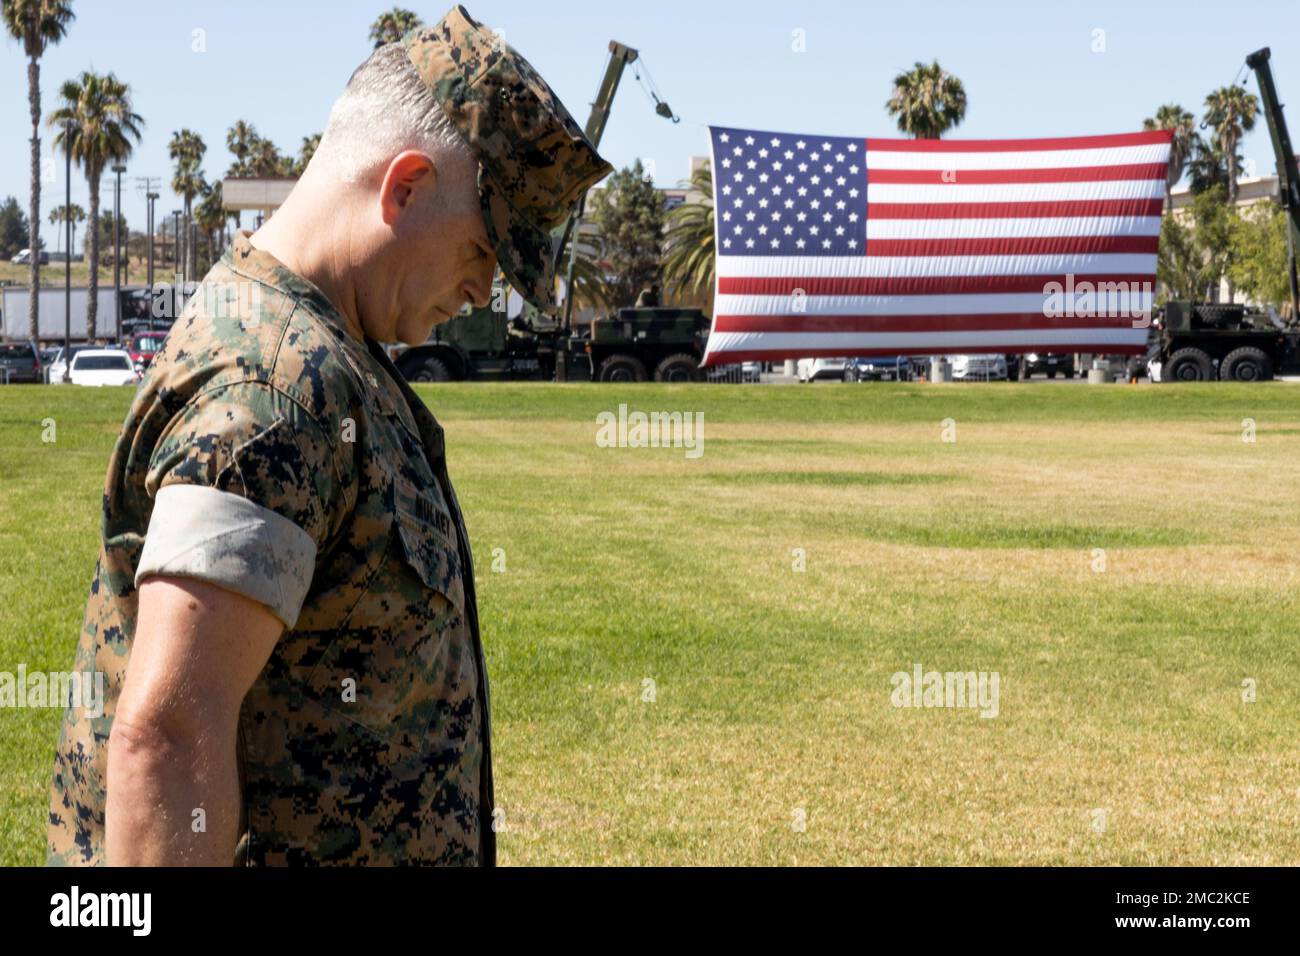 U.S. Marine Maj. Christopher B. Mulkey, the commander of troops of 1st Network Battalion, Marine Corps Cyberspace Operations Group, bows his head during a change of command ceremony on Marine Corps Base Camp Pendleton, California, June 24, 2022. 1st Network Bn. improves oversight, command, and control of the Marine Corps enterprise network while managing local area networks in the west coast region. Stock Photo